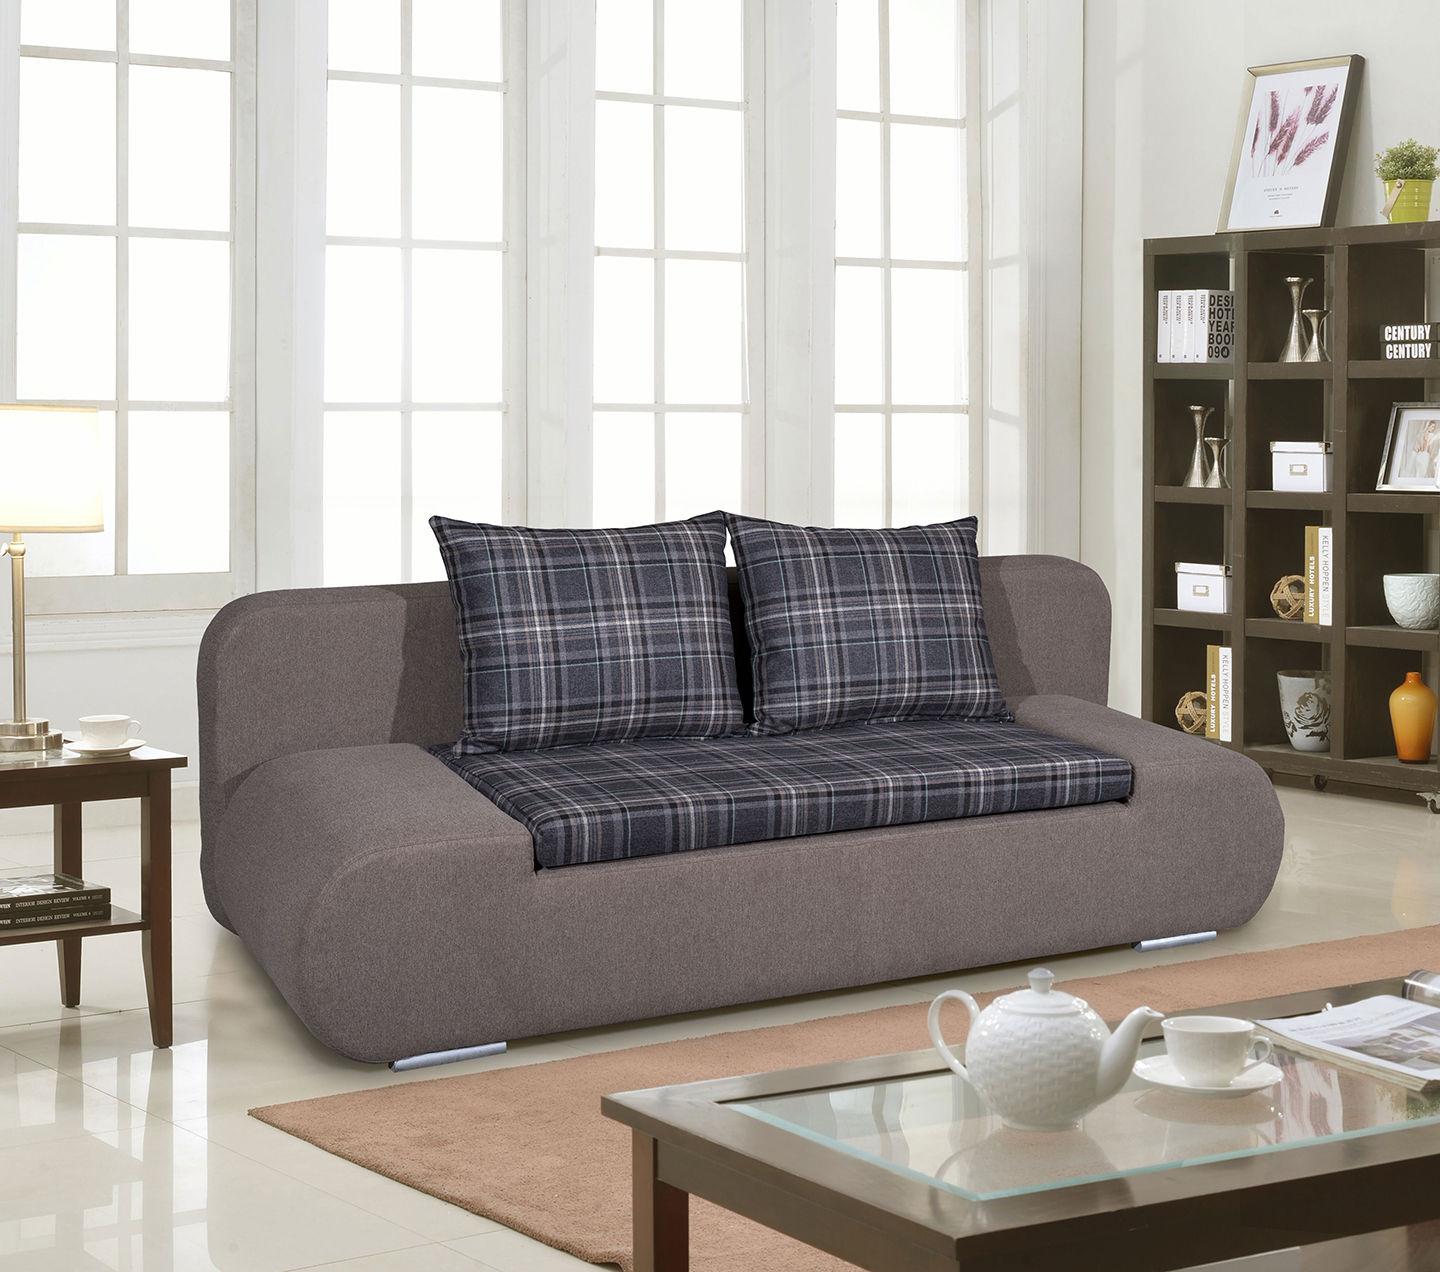 

    
ESF Strit Contemporary Style Grayish Brown Fabric Living Room Sofa Bed
